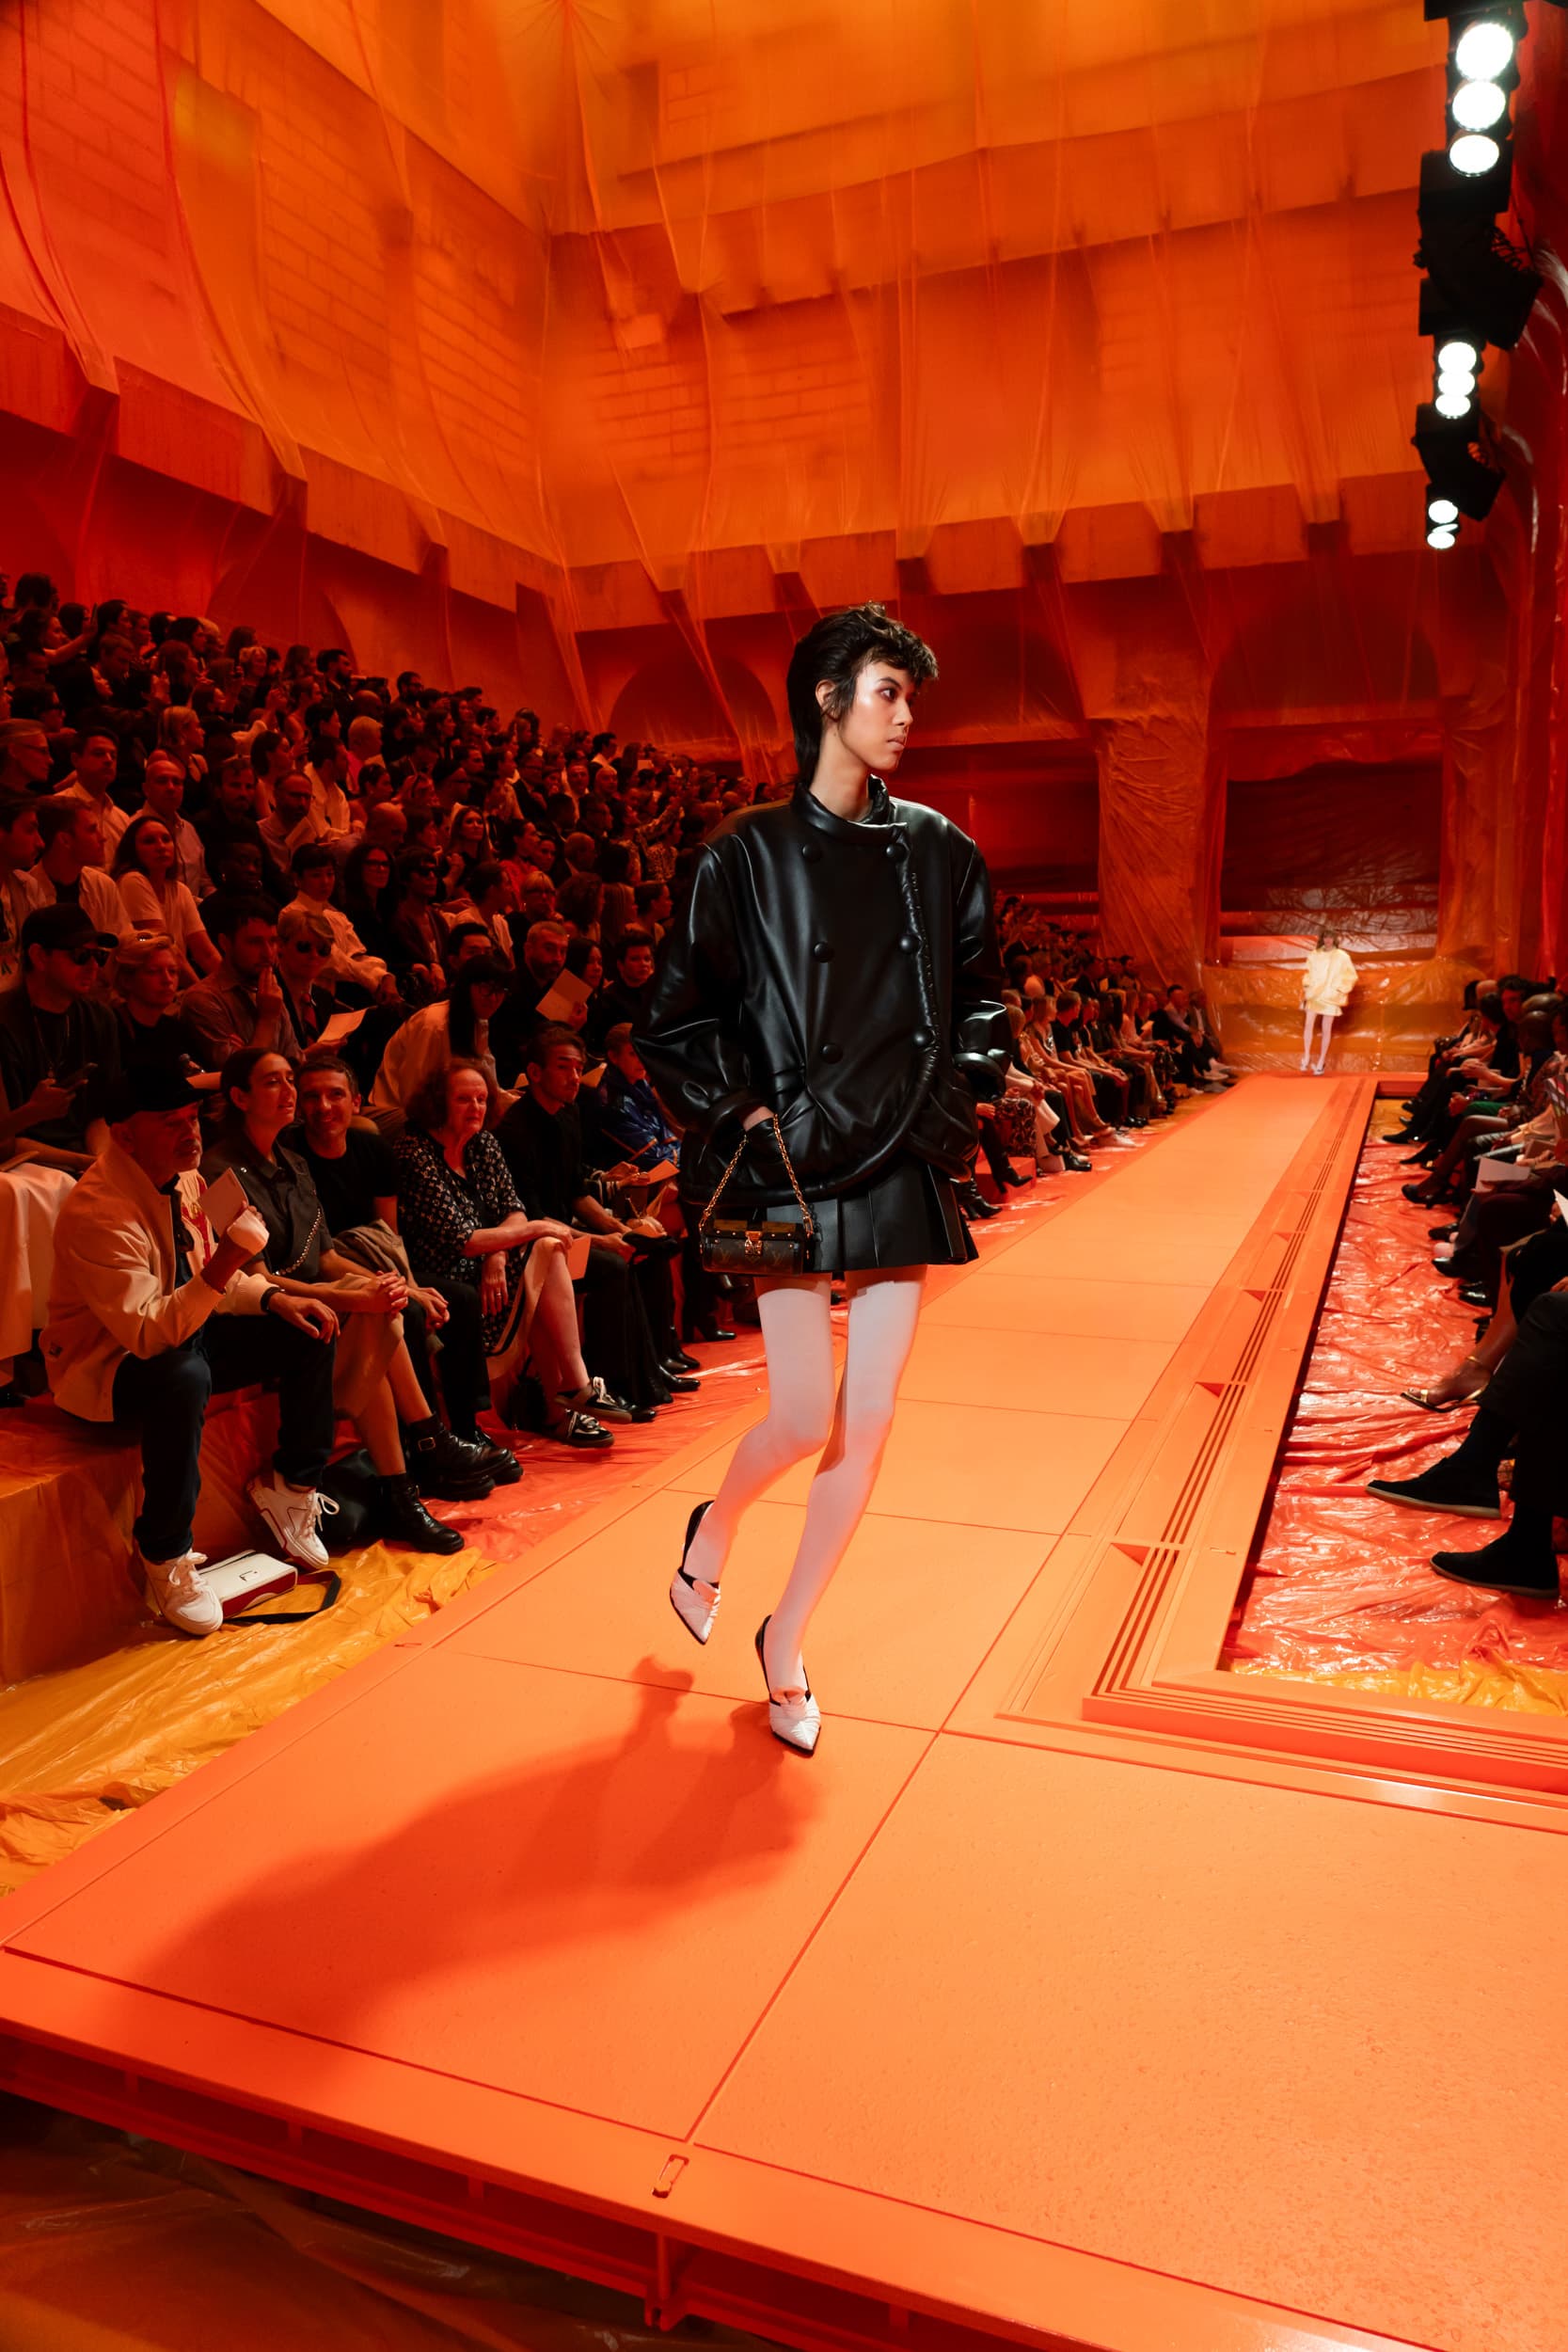 LVMH Revenues Up 1% in Third Quarter as Fashion Sales Slow – WWD